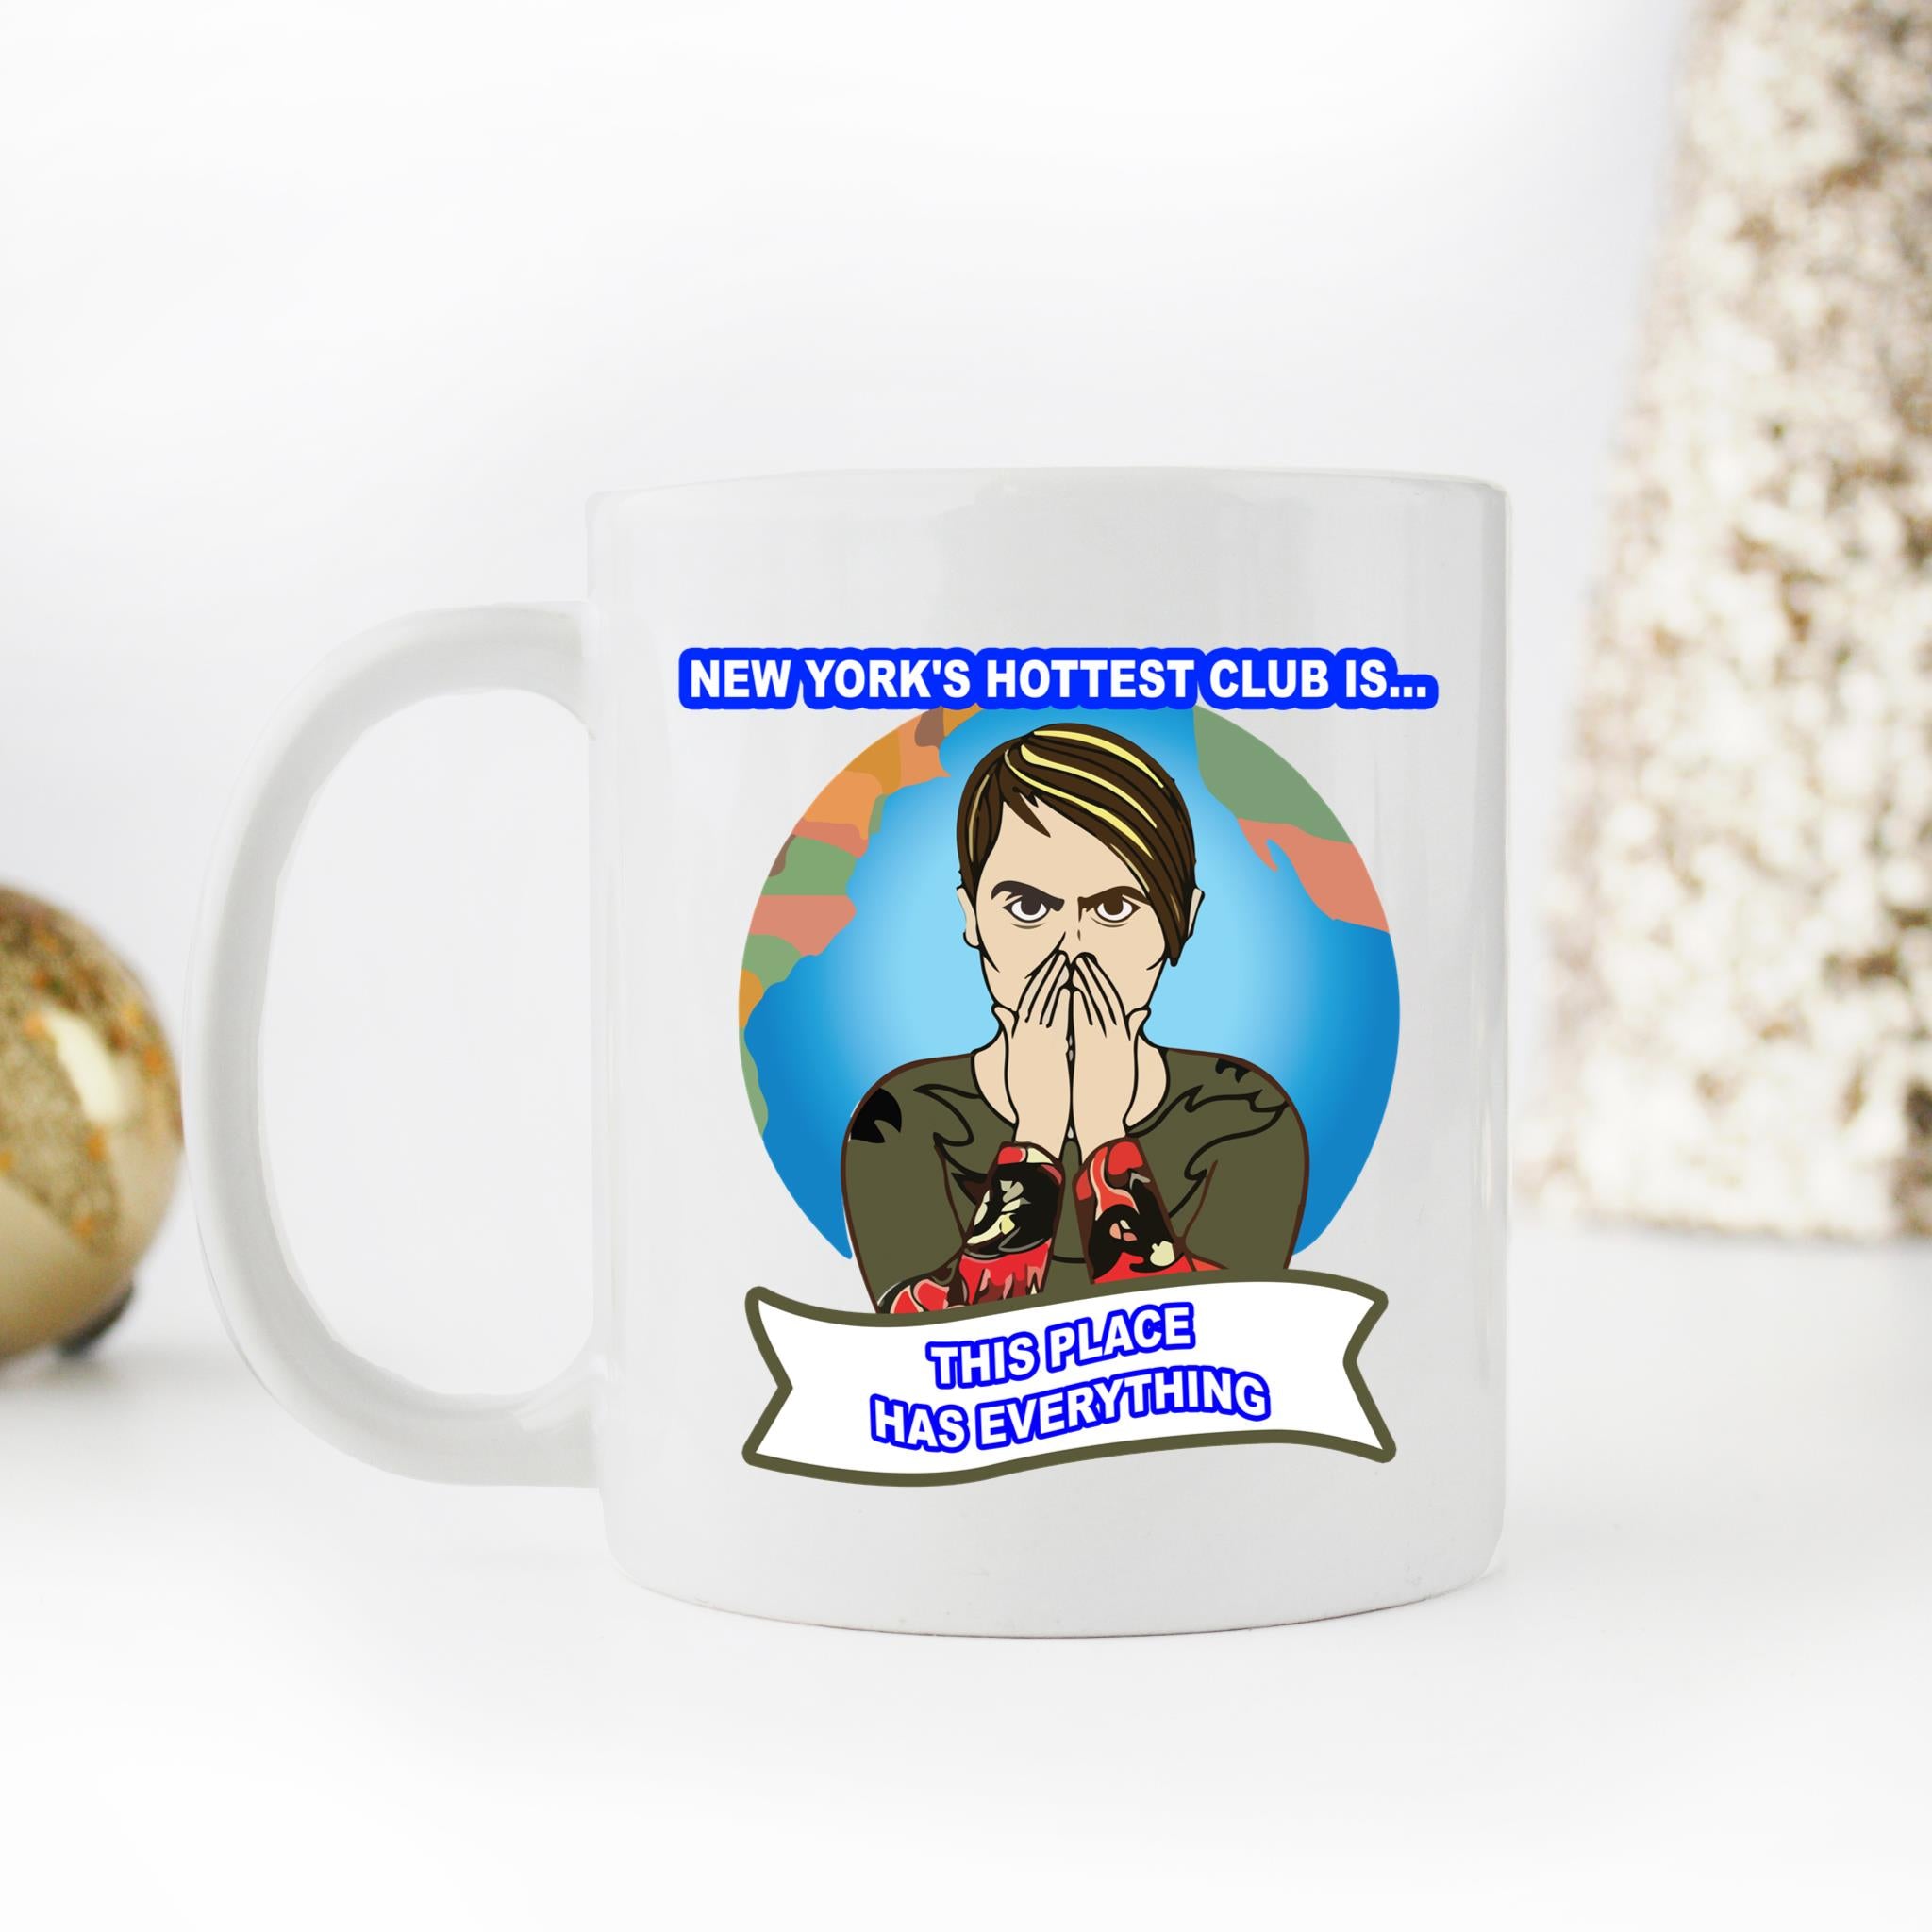 Skitongifts Funny Ceramic Coffee Mug Novelty M44-Lh031221_New York's Hottest Club Is... This Place Has Everything Rrbtaae